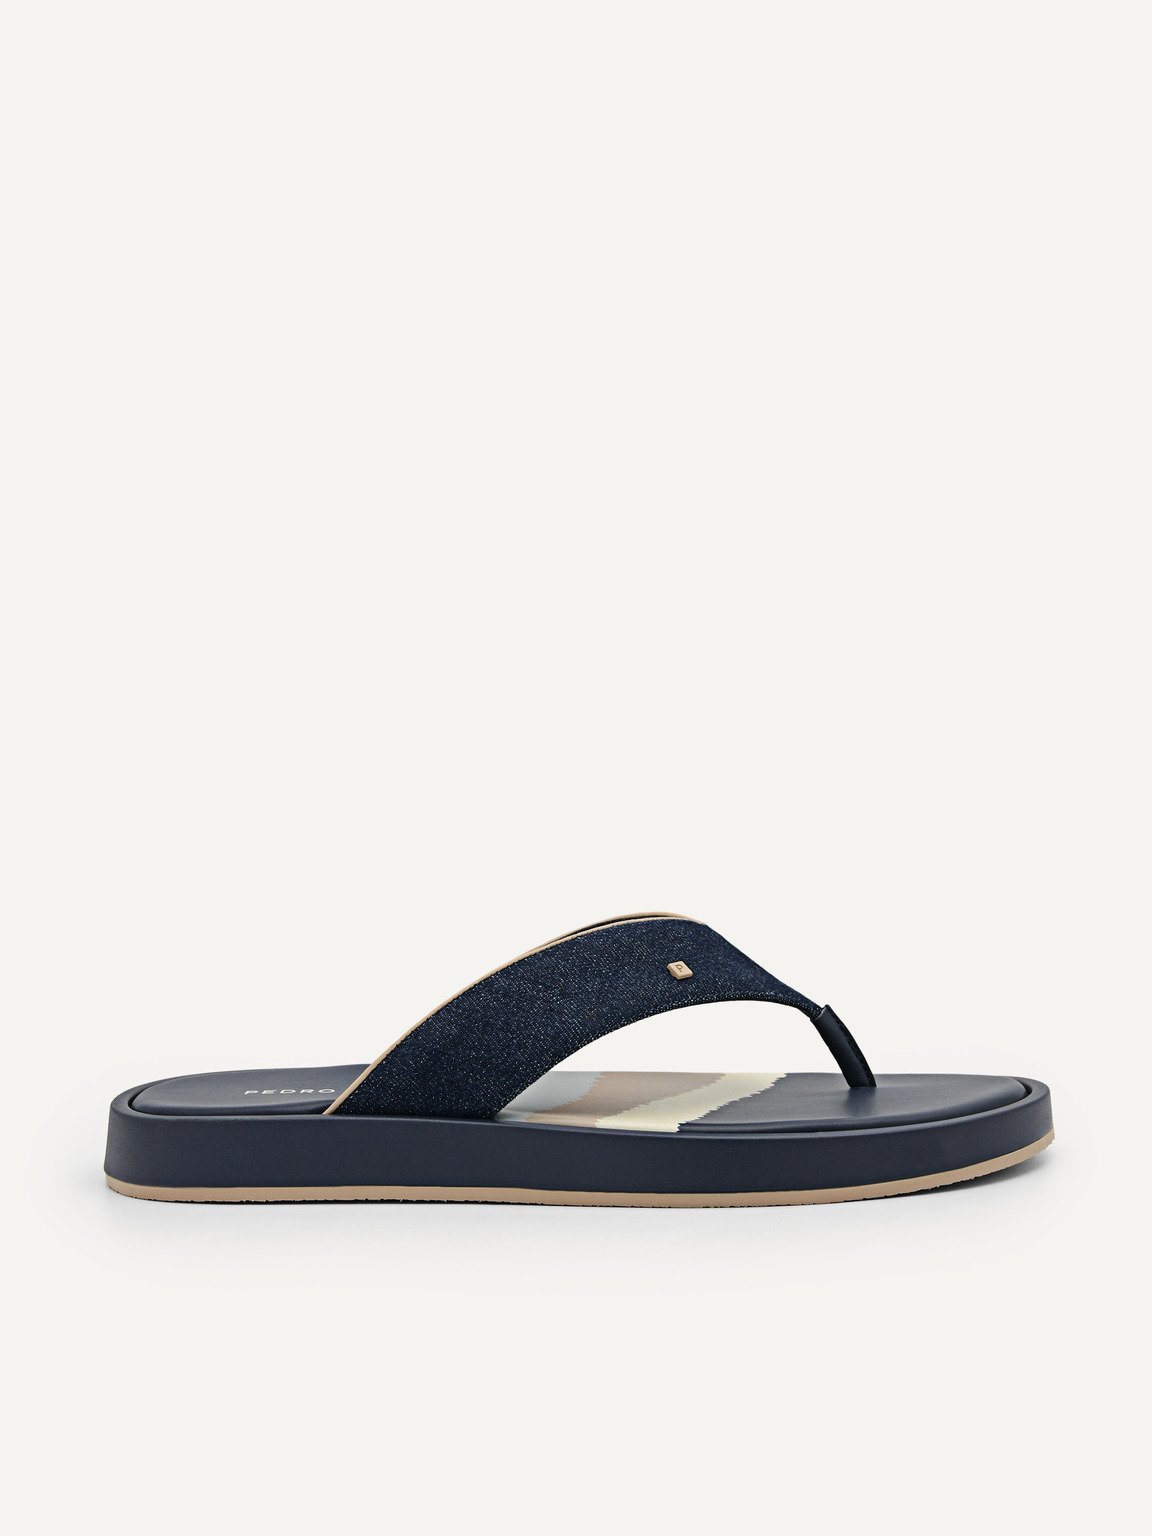 Fabric Thong Sandals, Navy